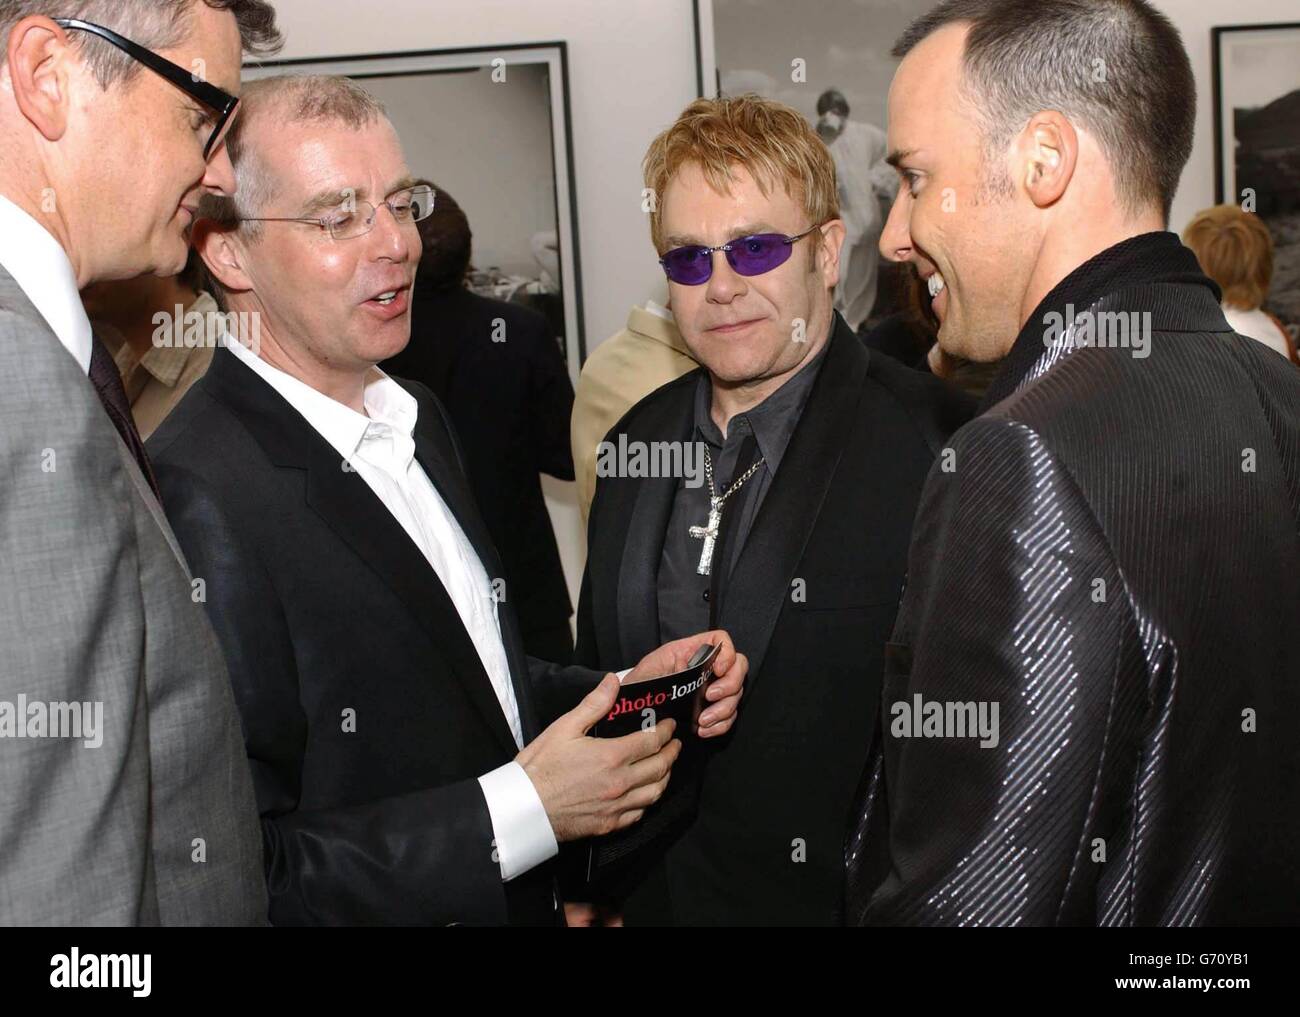 From left to right) art dealer Jay Joplin, musician Neil Tennant, singer  Sir Elton John and his partner David Furnish during the private view of  photo-london, the first annual art fair in